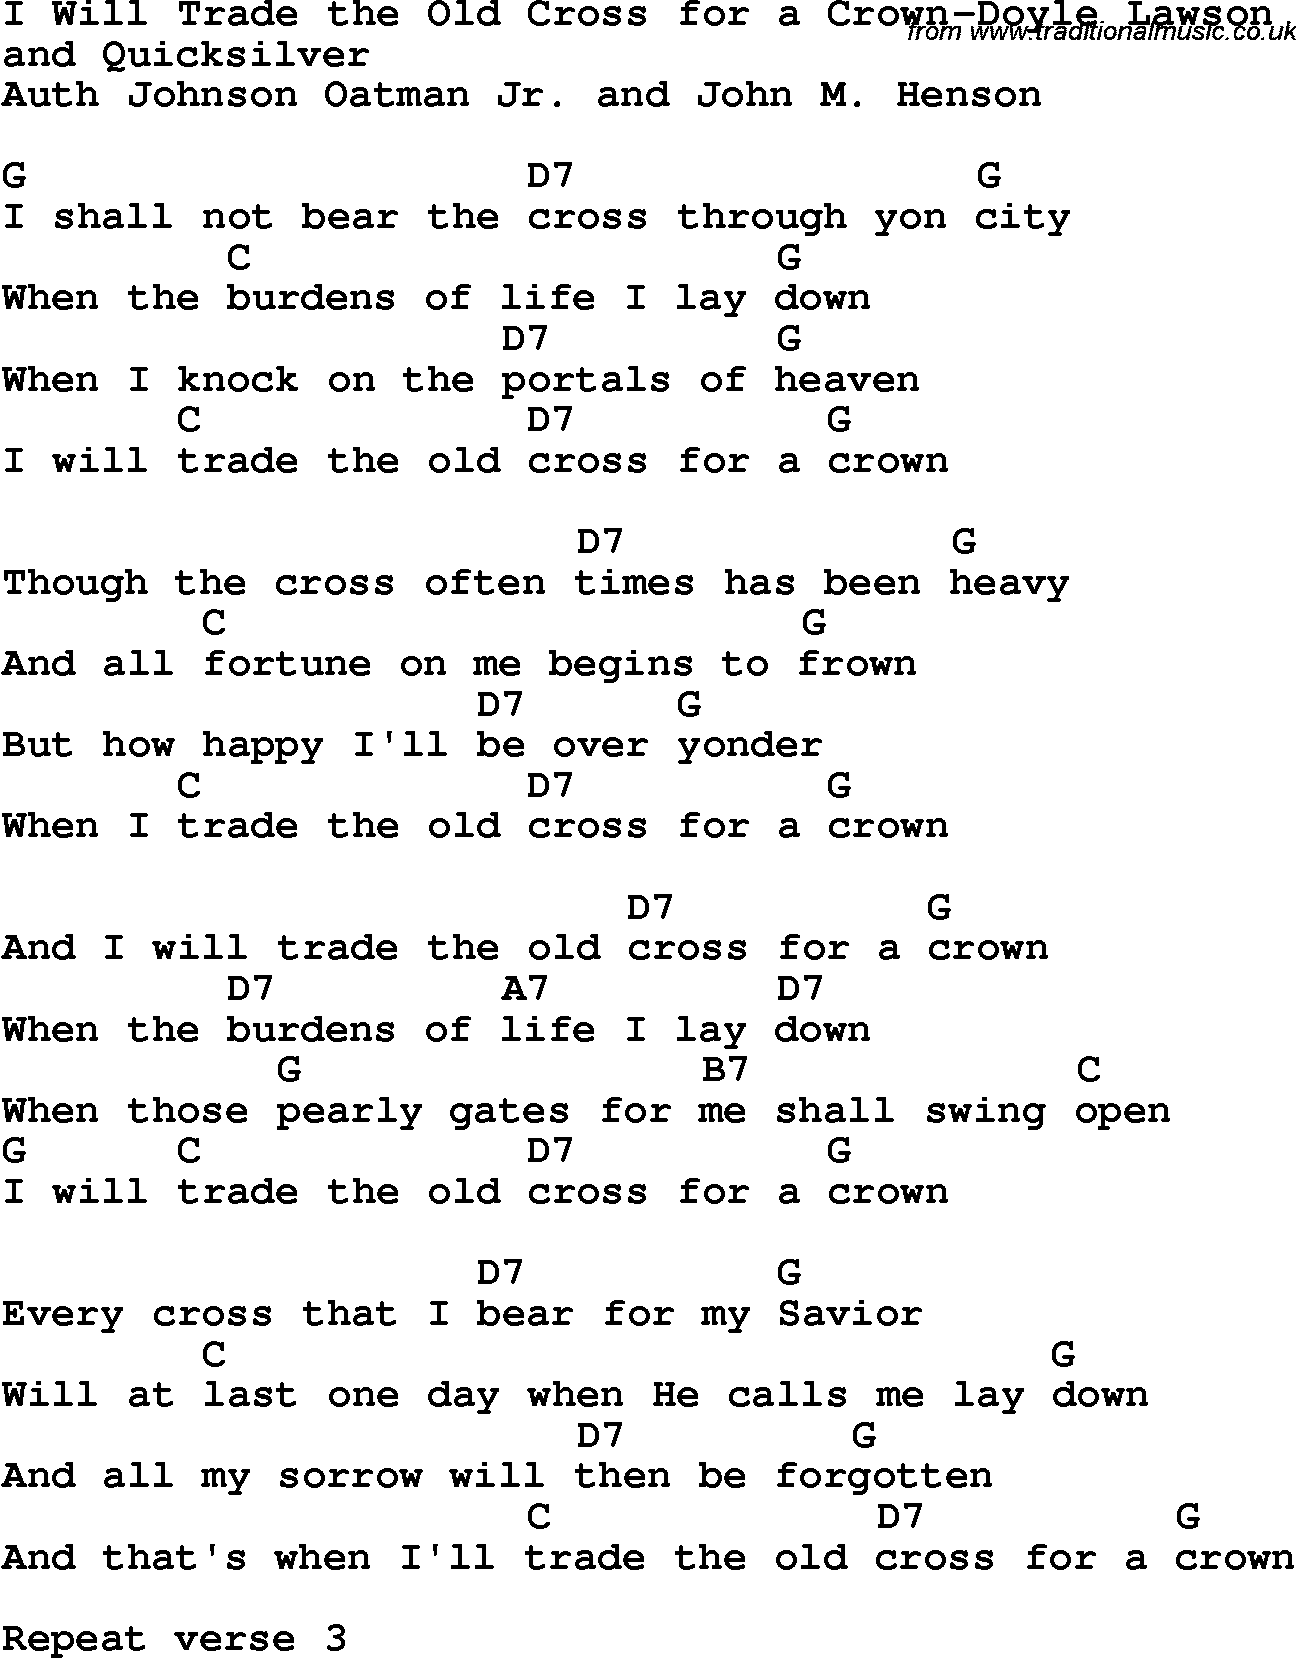 Country, Southern and Bluegrass Gospel Song I Will Trade the Old Cross for a Crown-Doyle Lawson lyrics and chords